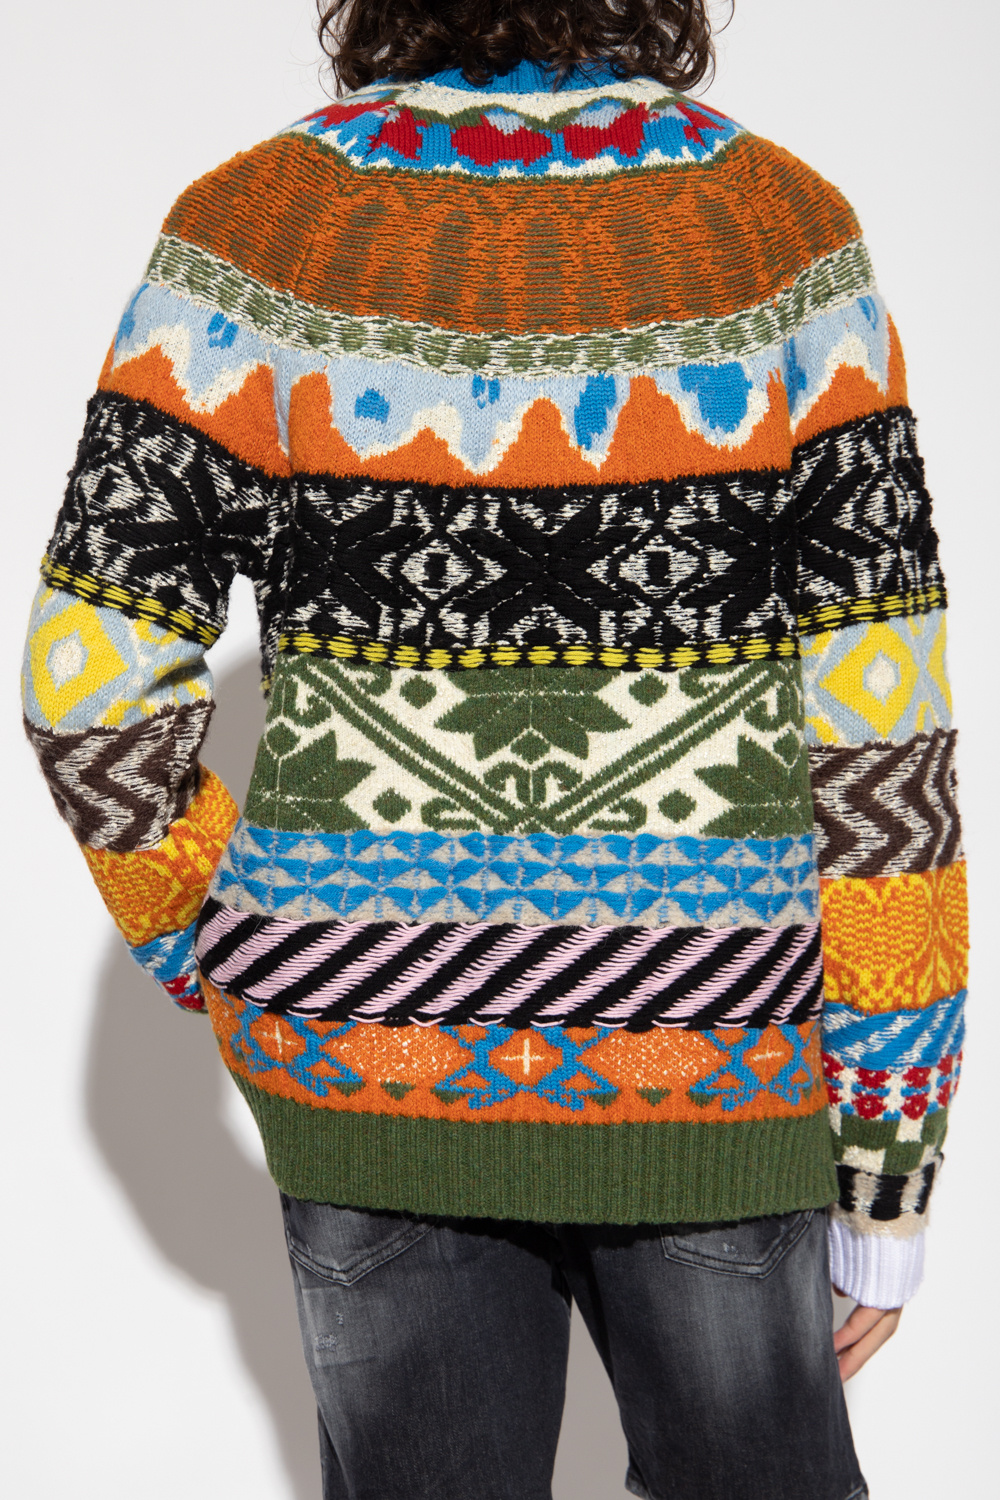 Dsquared2 Patterned sweater